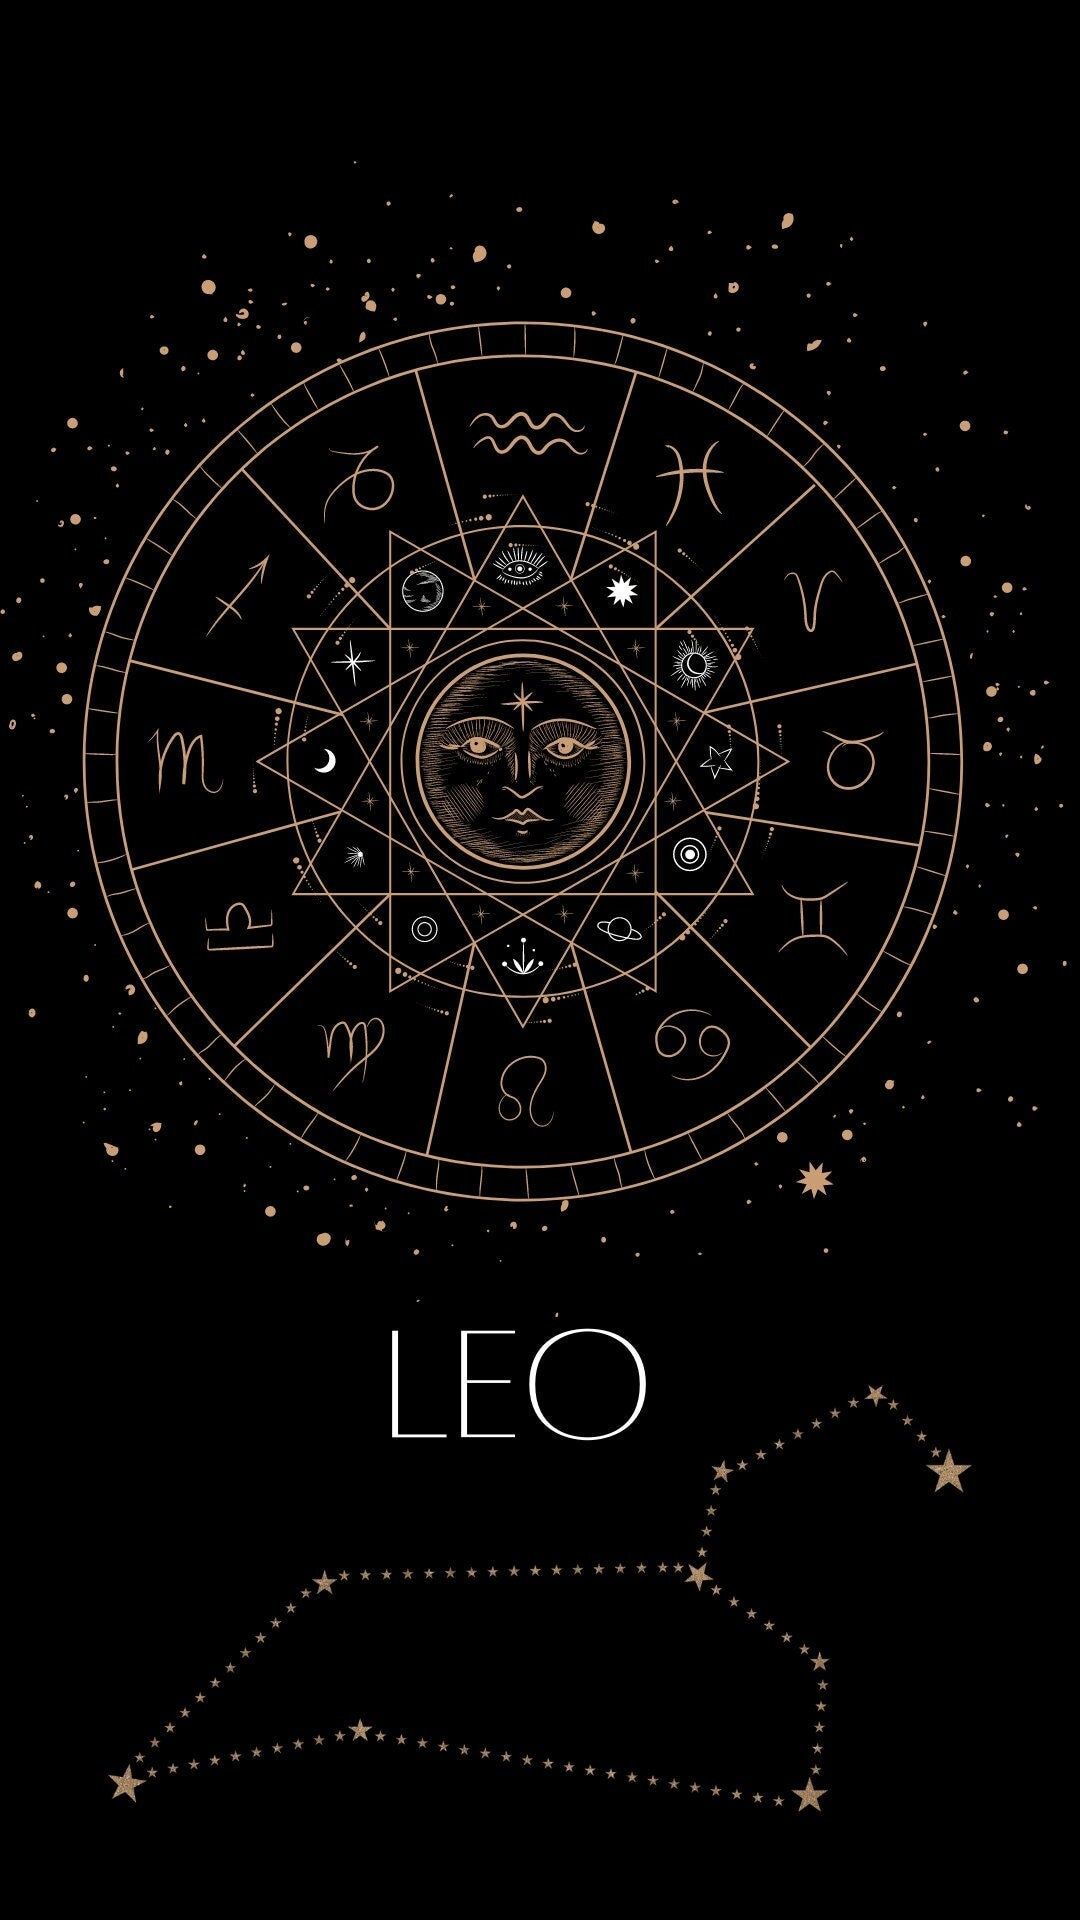 IPhone wallpaper with Leo zodiac sign and all the details - Leo